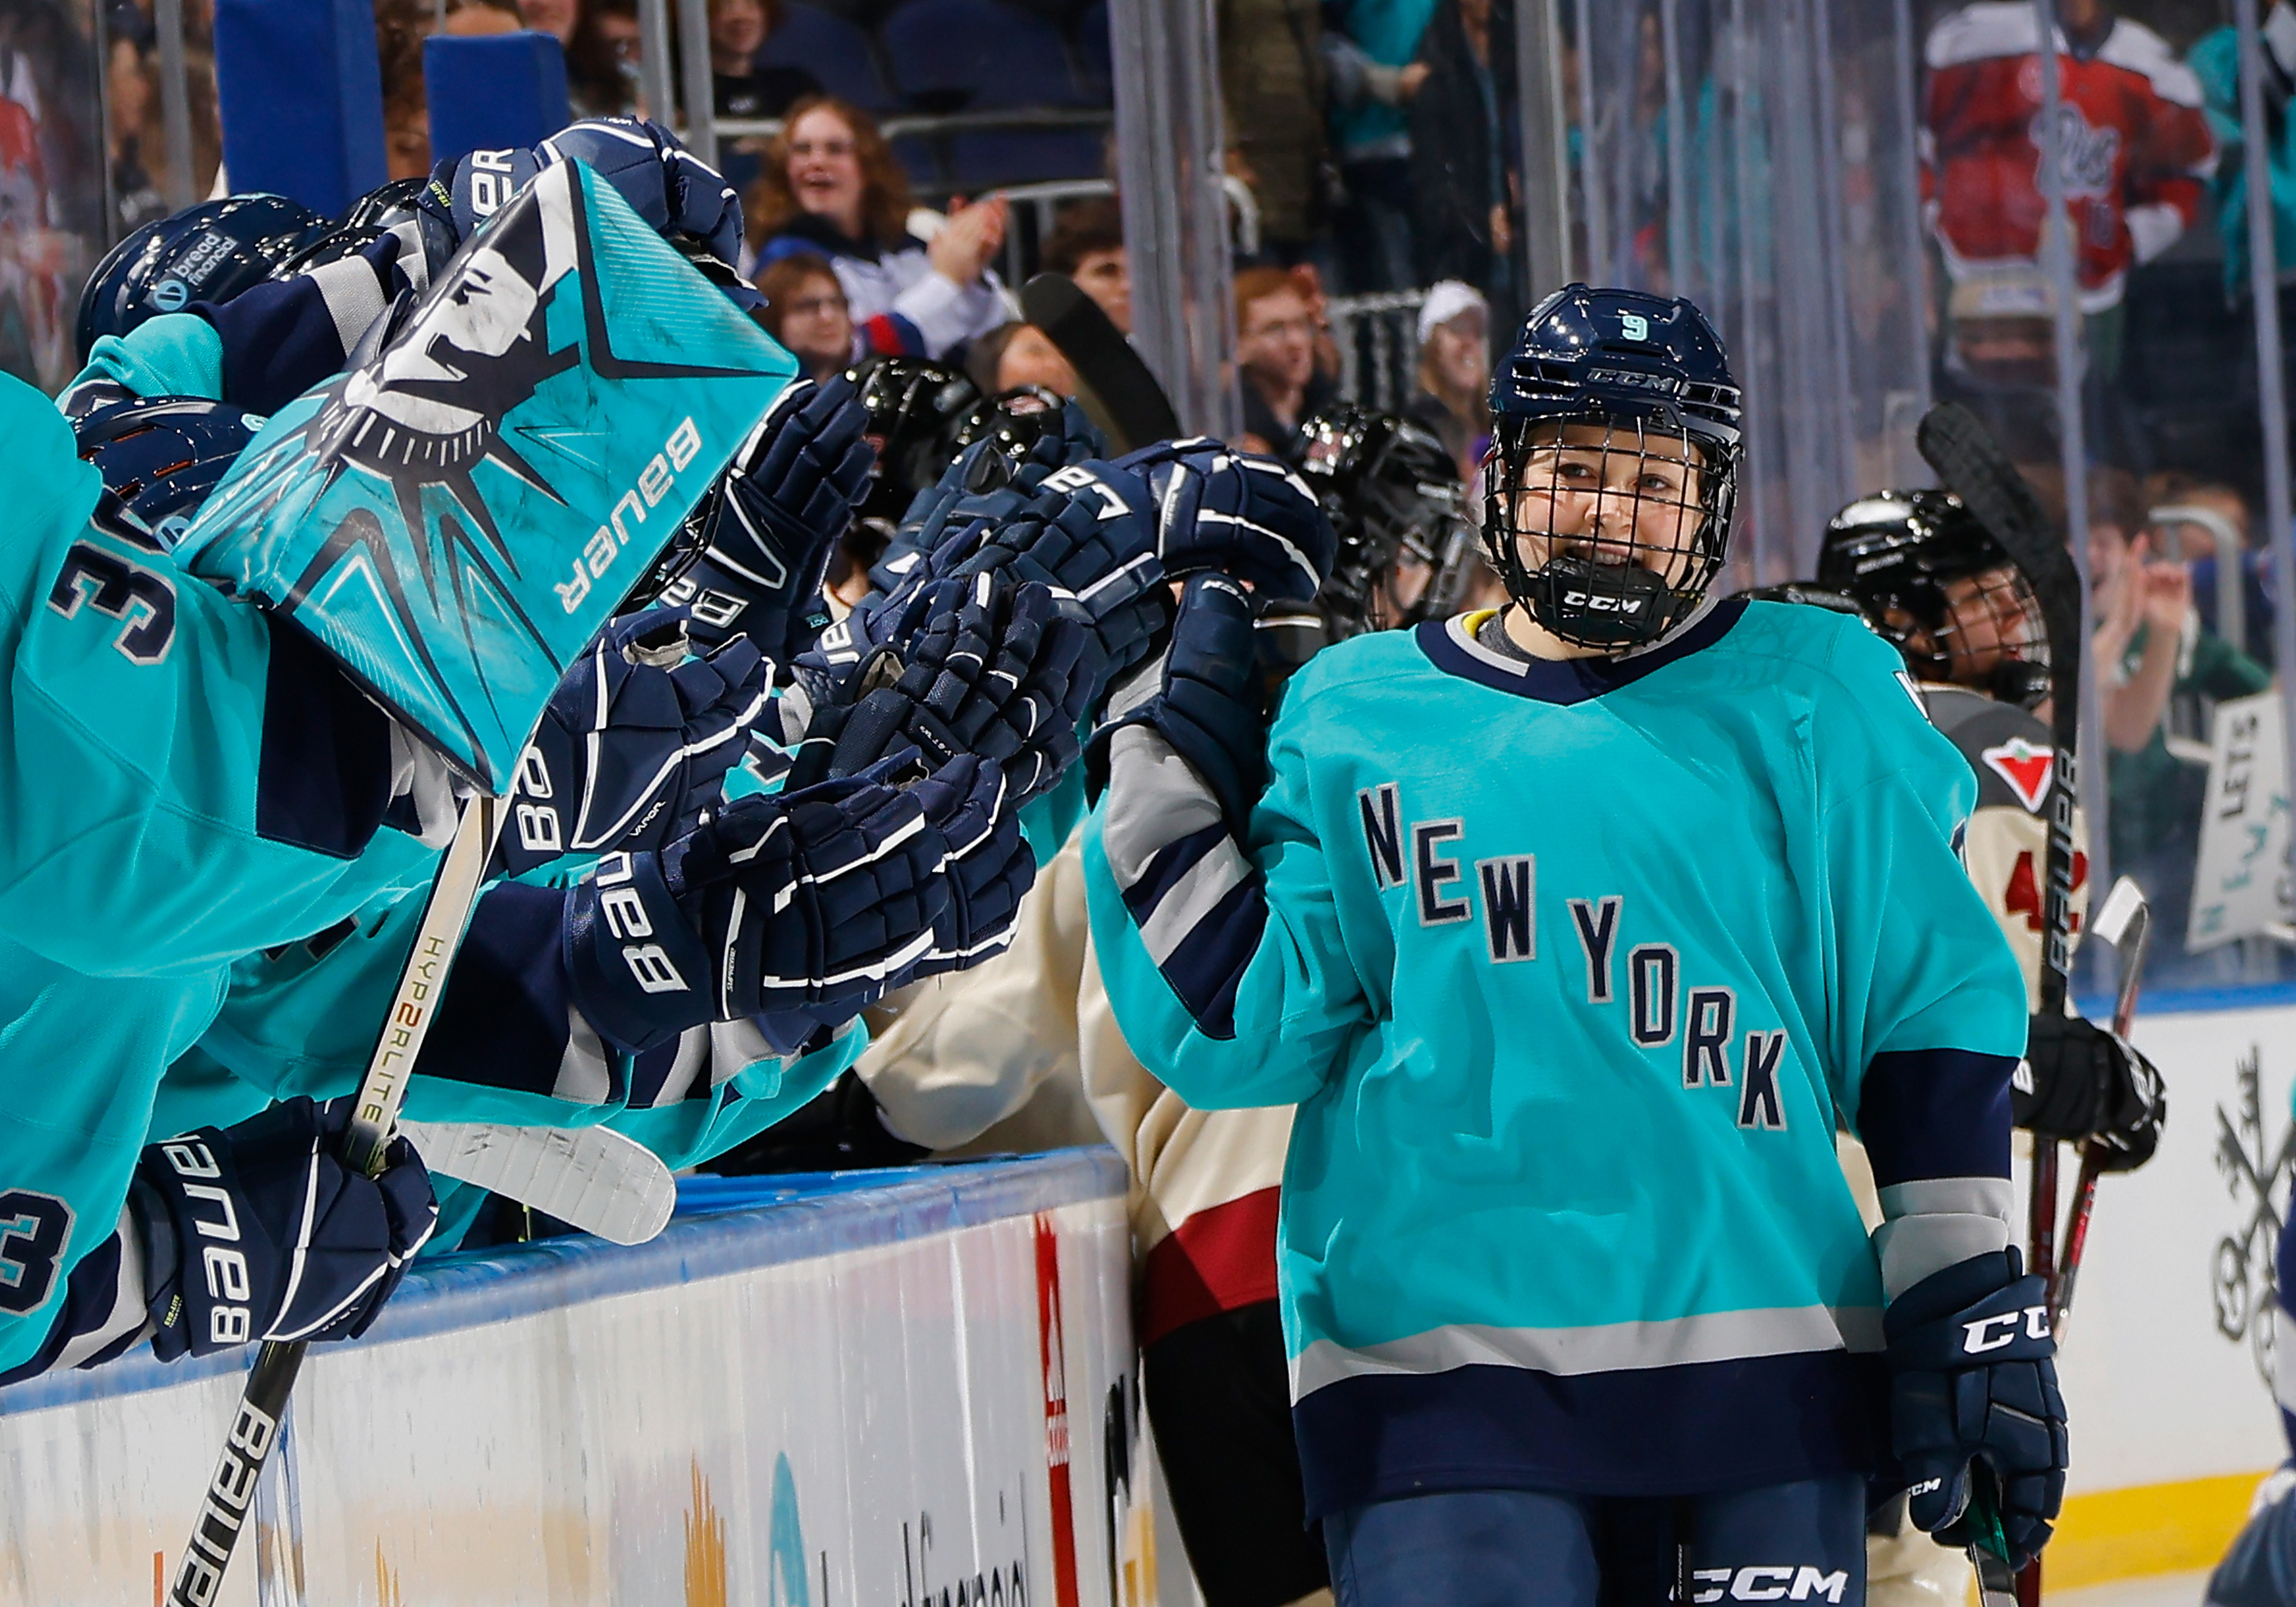 Ice hockey players in action on the rink, wearing &quot;New York&quot; jerseys, with gear and fans in background